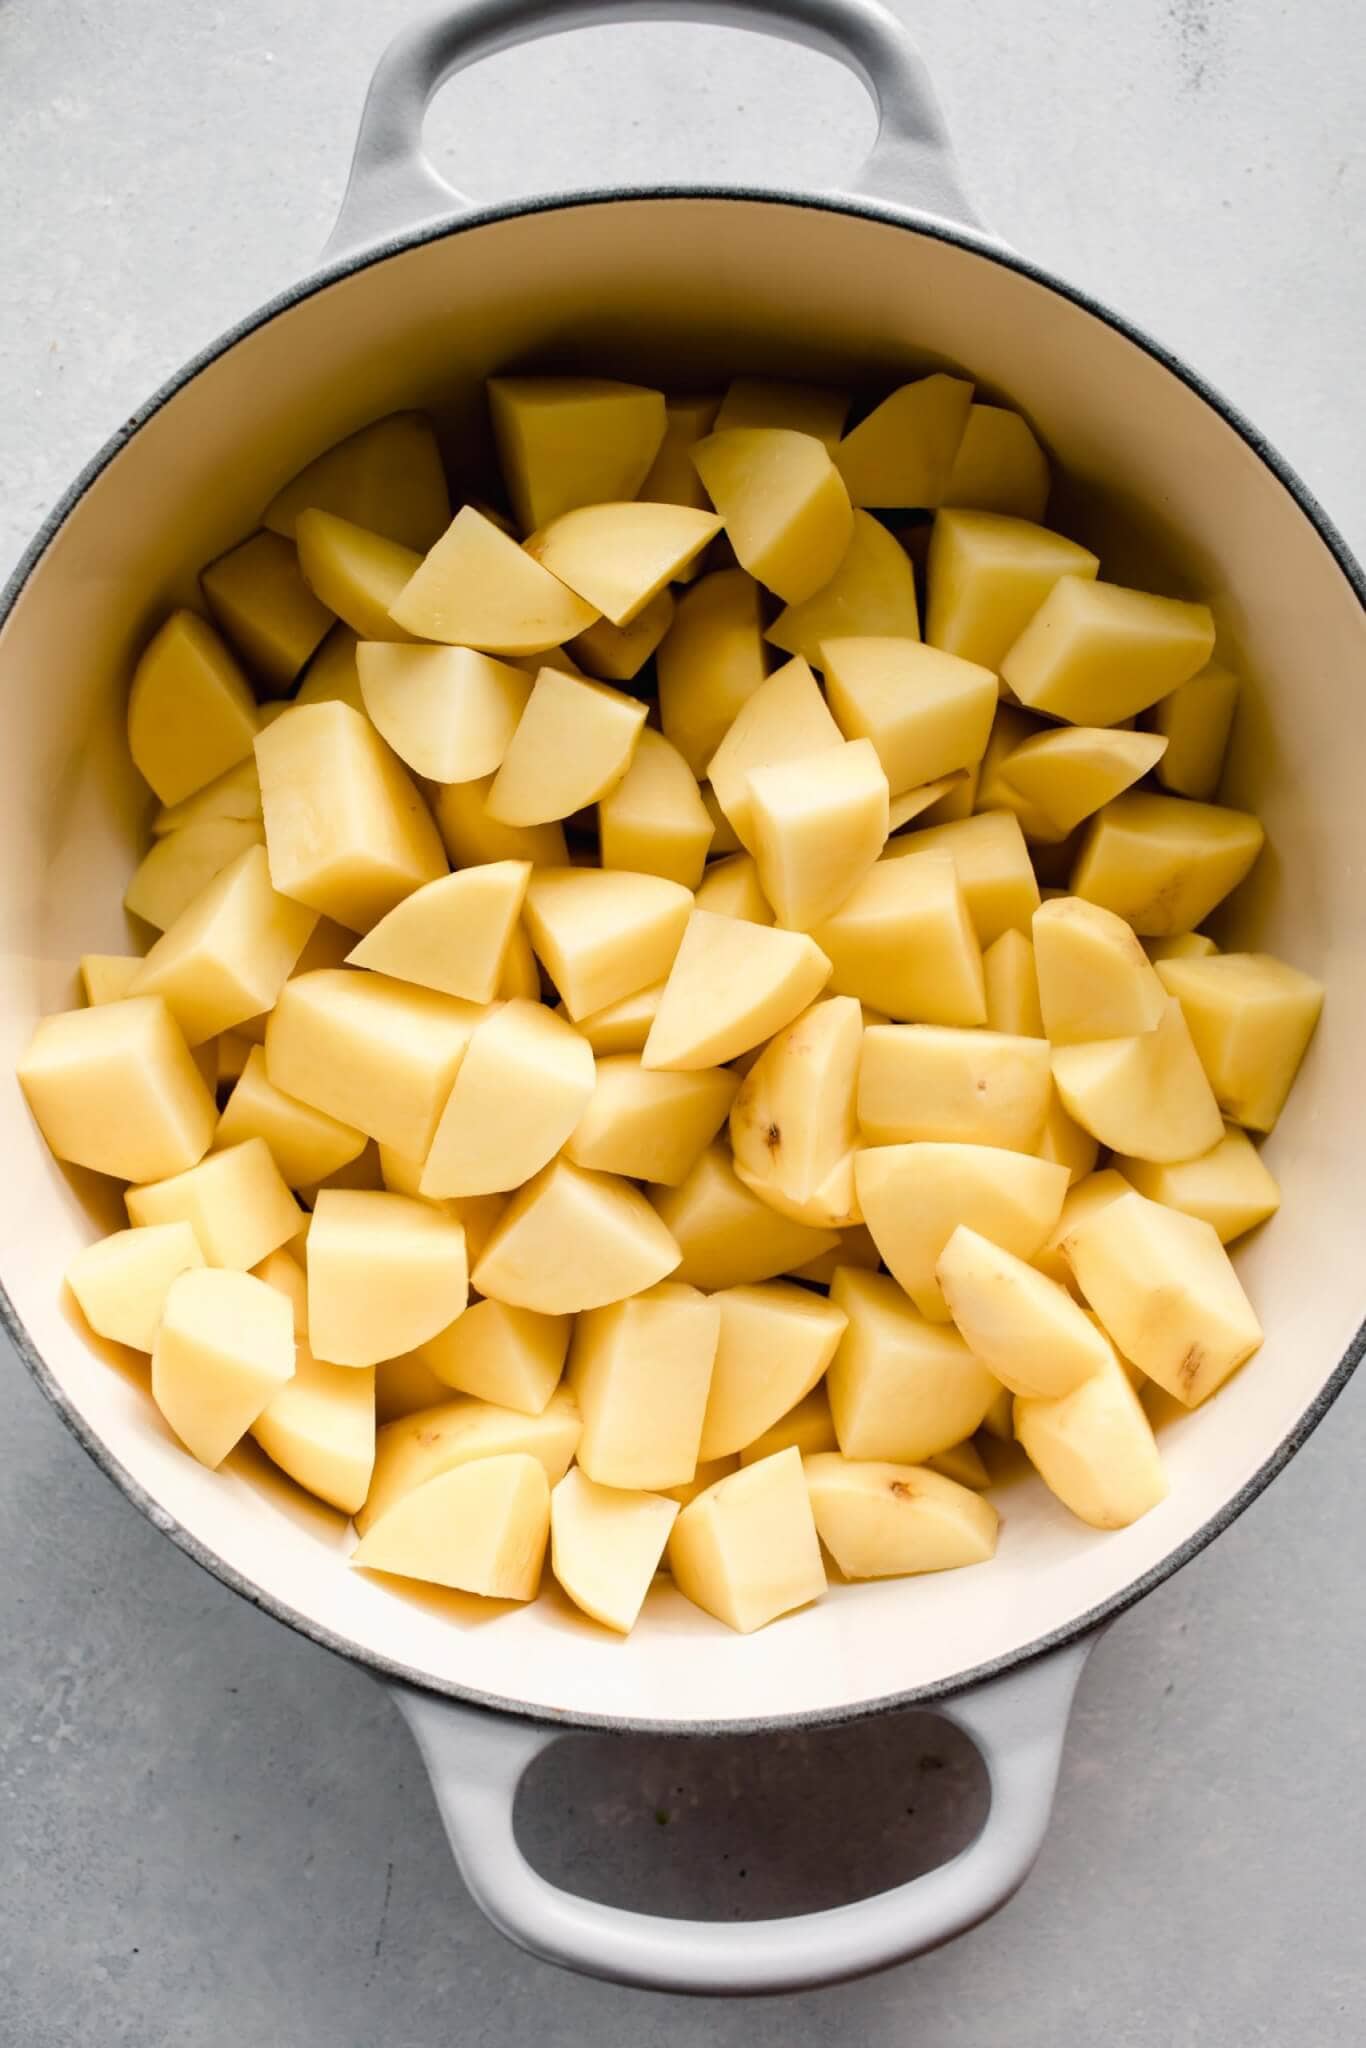 Cubed potatoes in dutch oven before boiling.